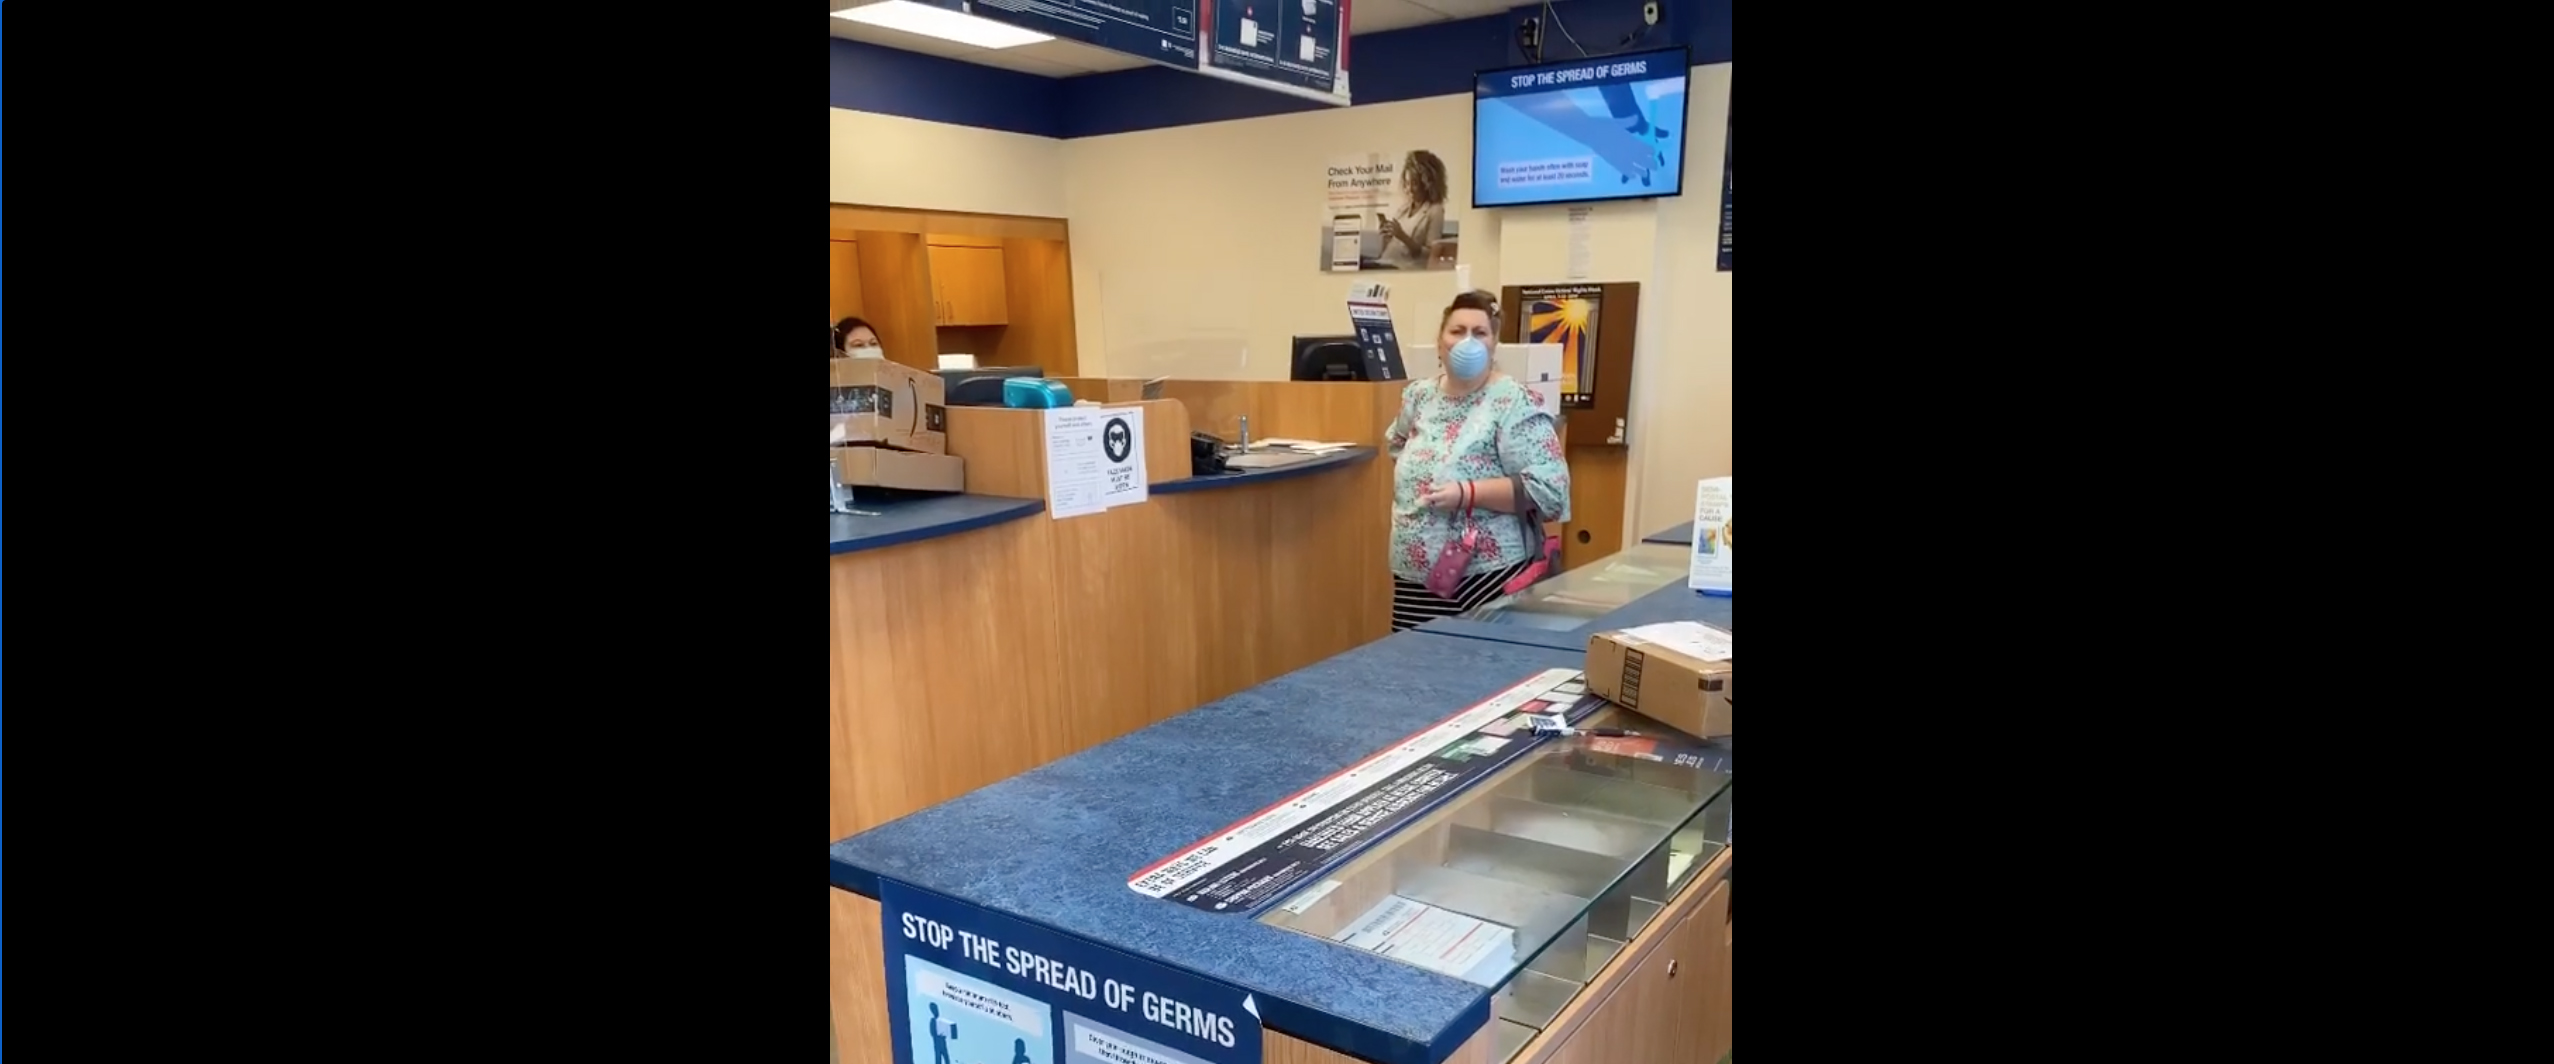 PHOTO: A woman was caught on camera using racial slurs at a post office on Main Street in Los Altos, July 23, 2020.